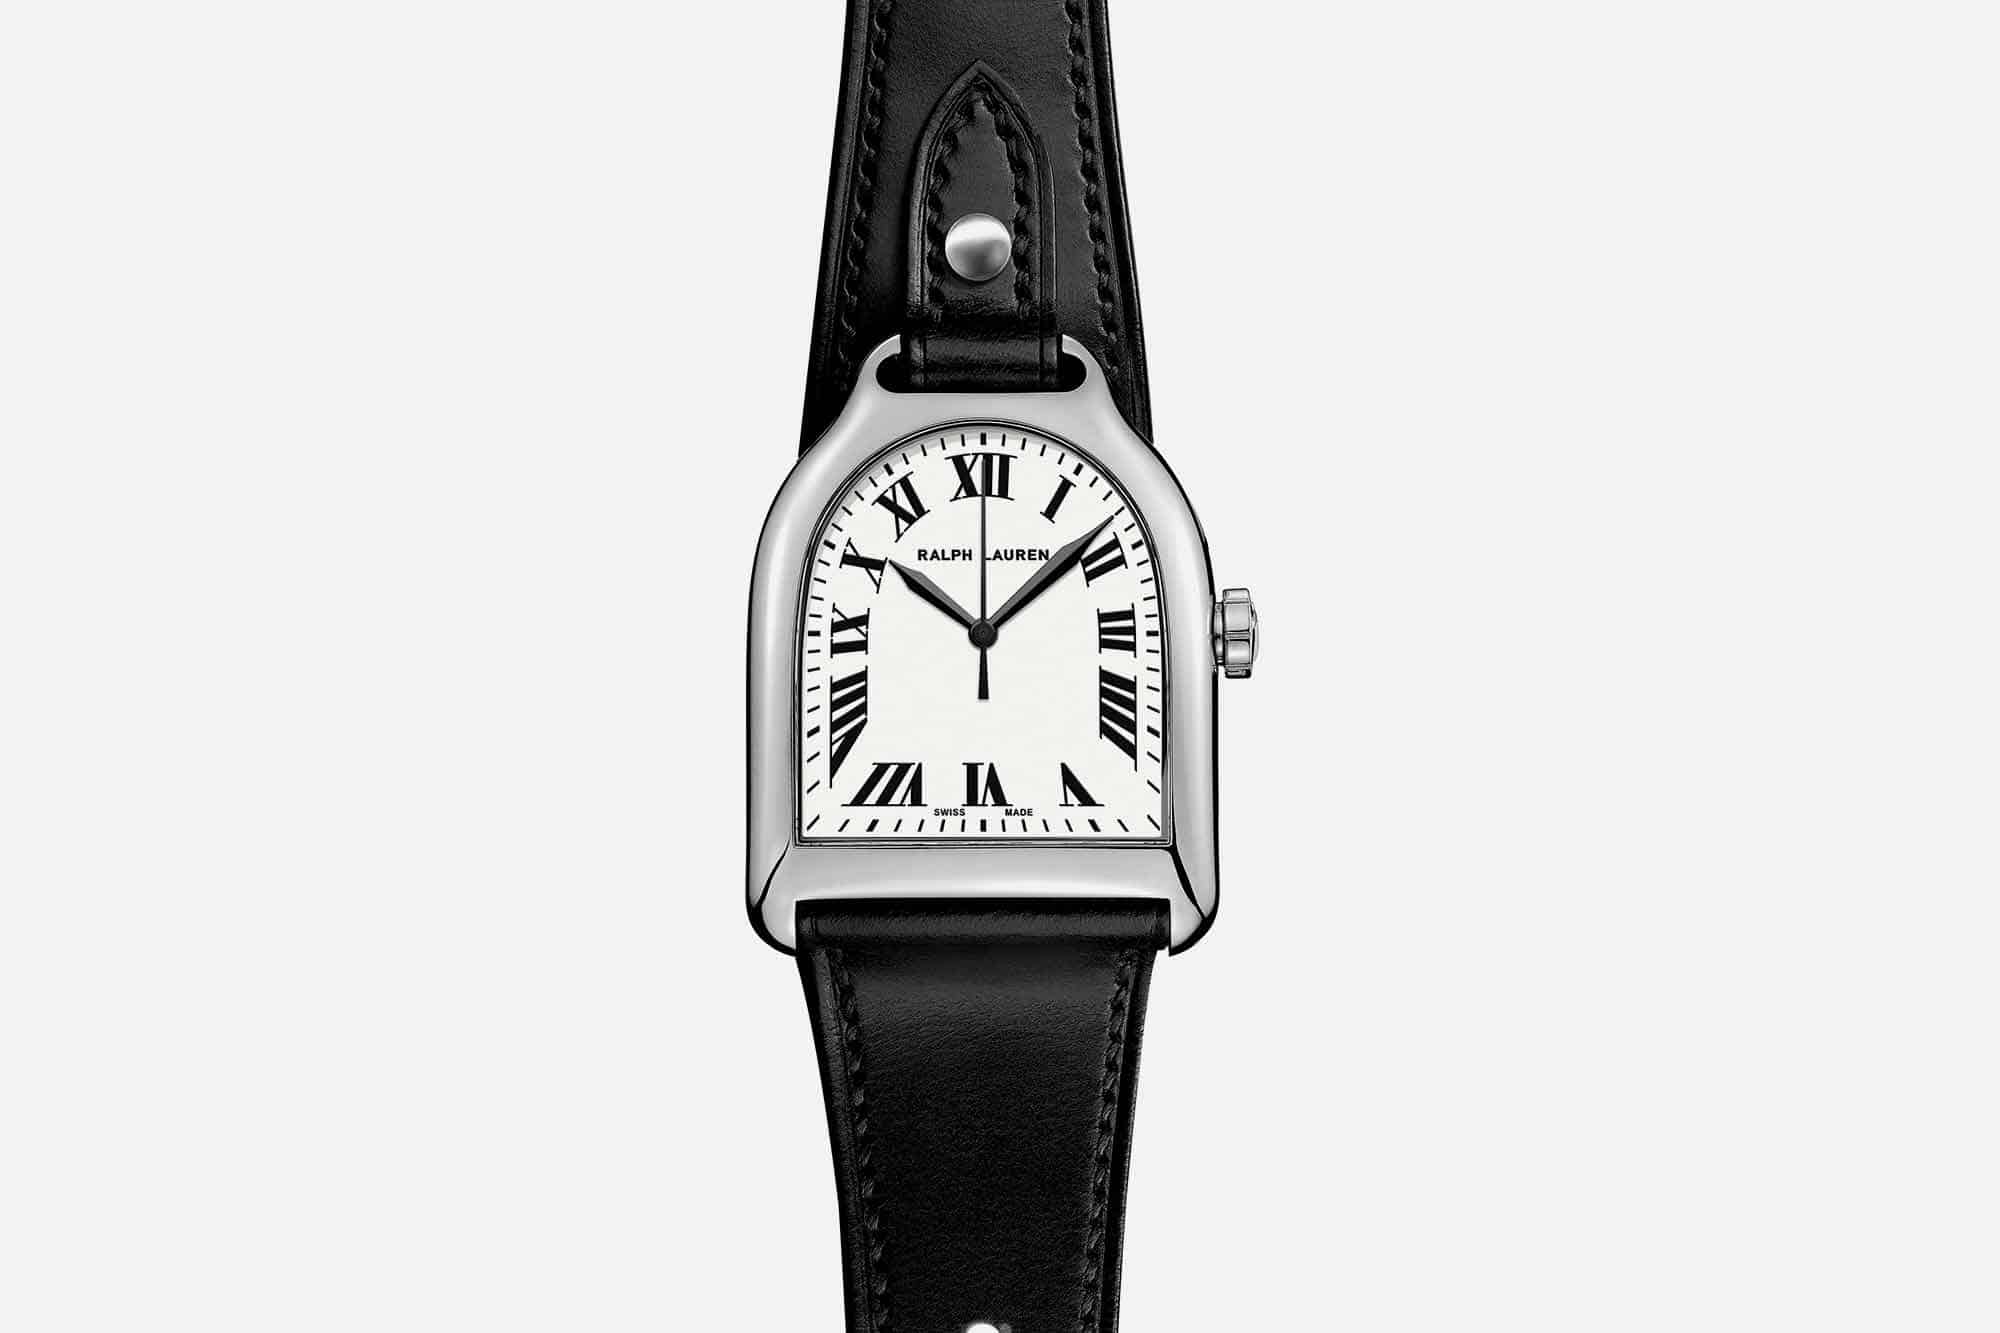 Ralph Lauren’s Stirrup Gets a Refresh with New Straps, and Some Additional Thoughts on the 4th Watch